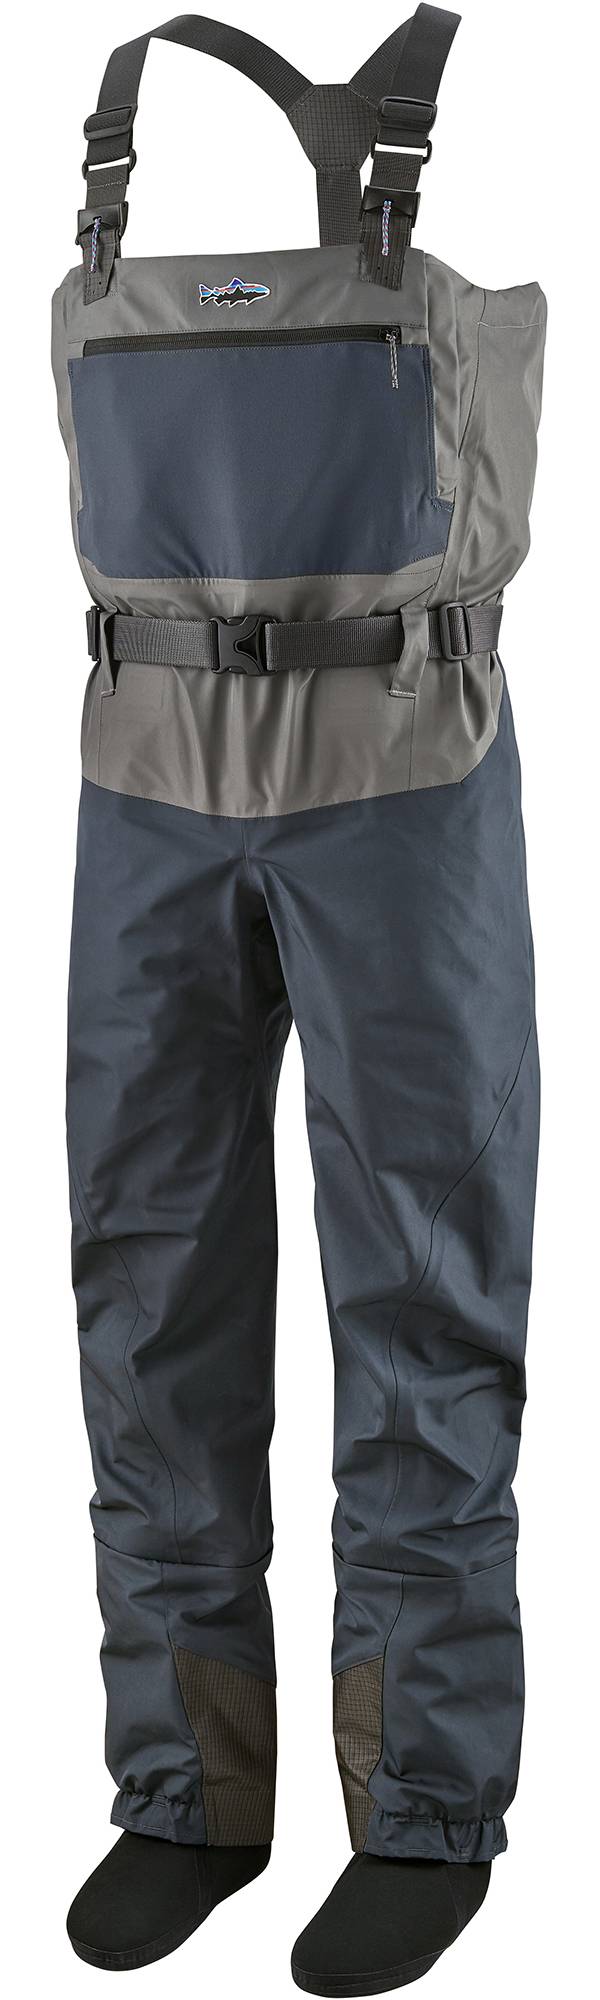 kighul Taxpayer Fru Patagonia Men's Swiftcurrent Waders | Publiclands